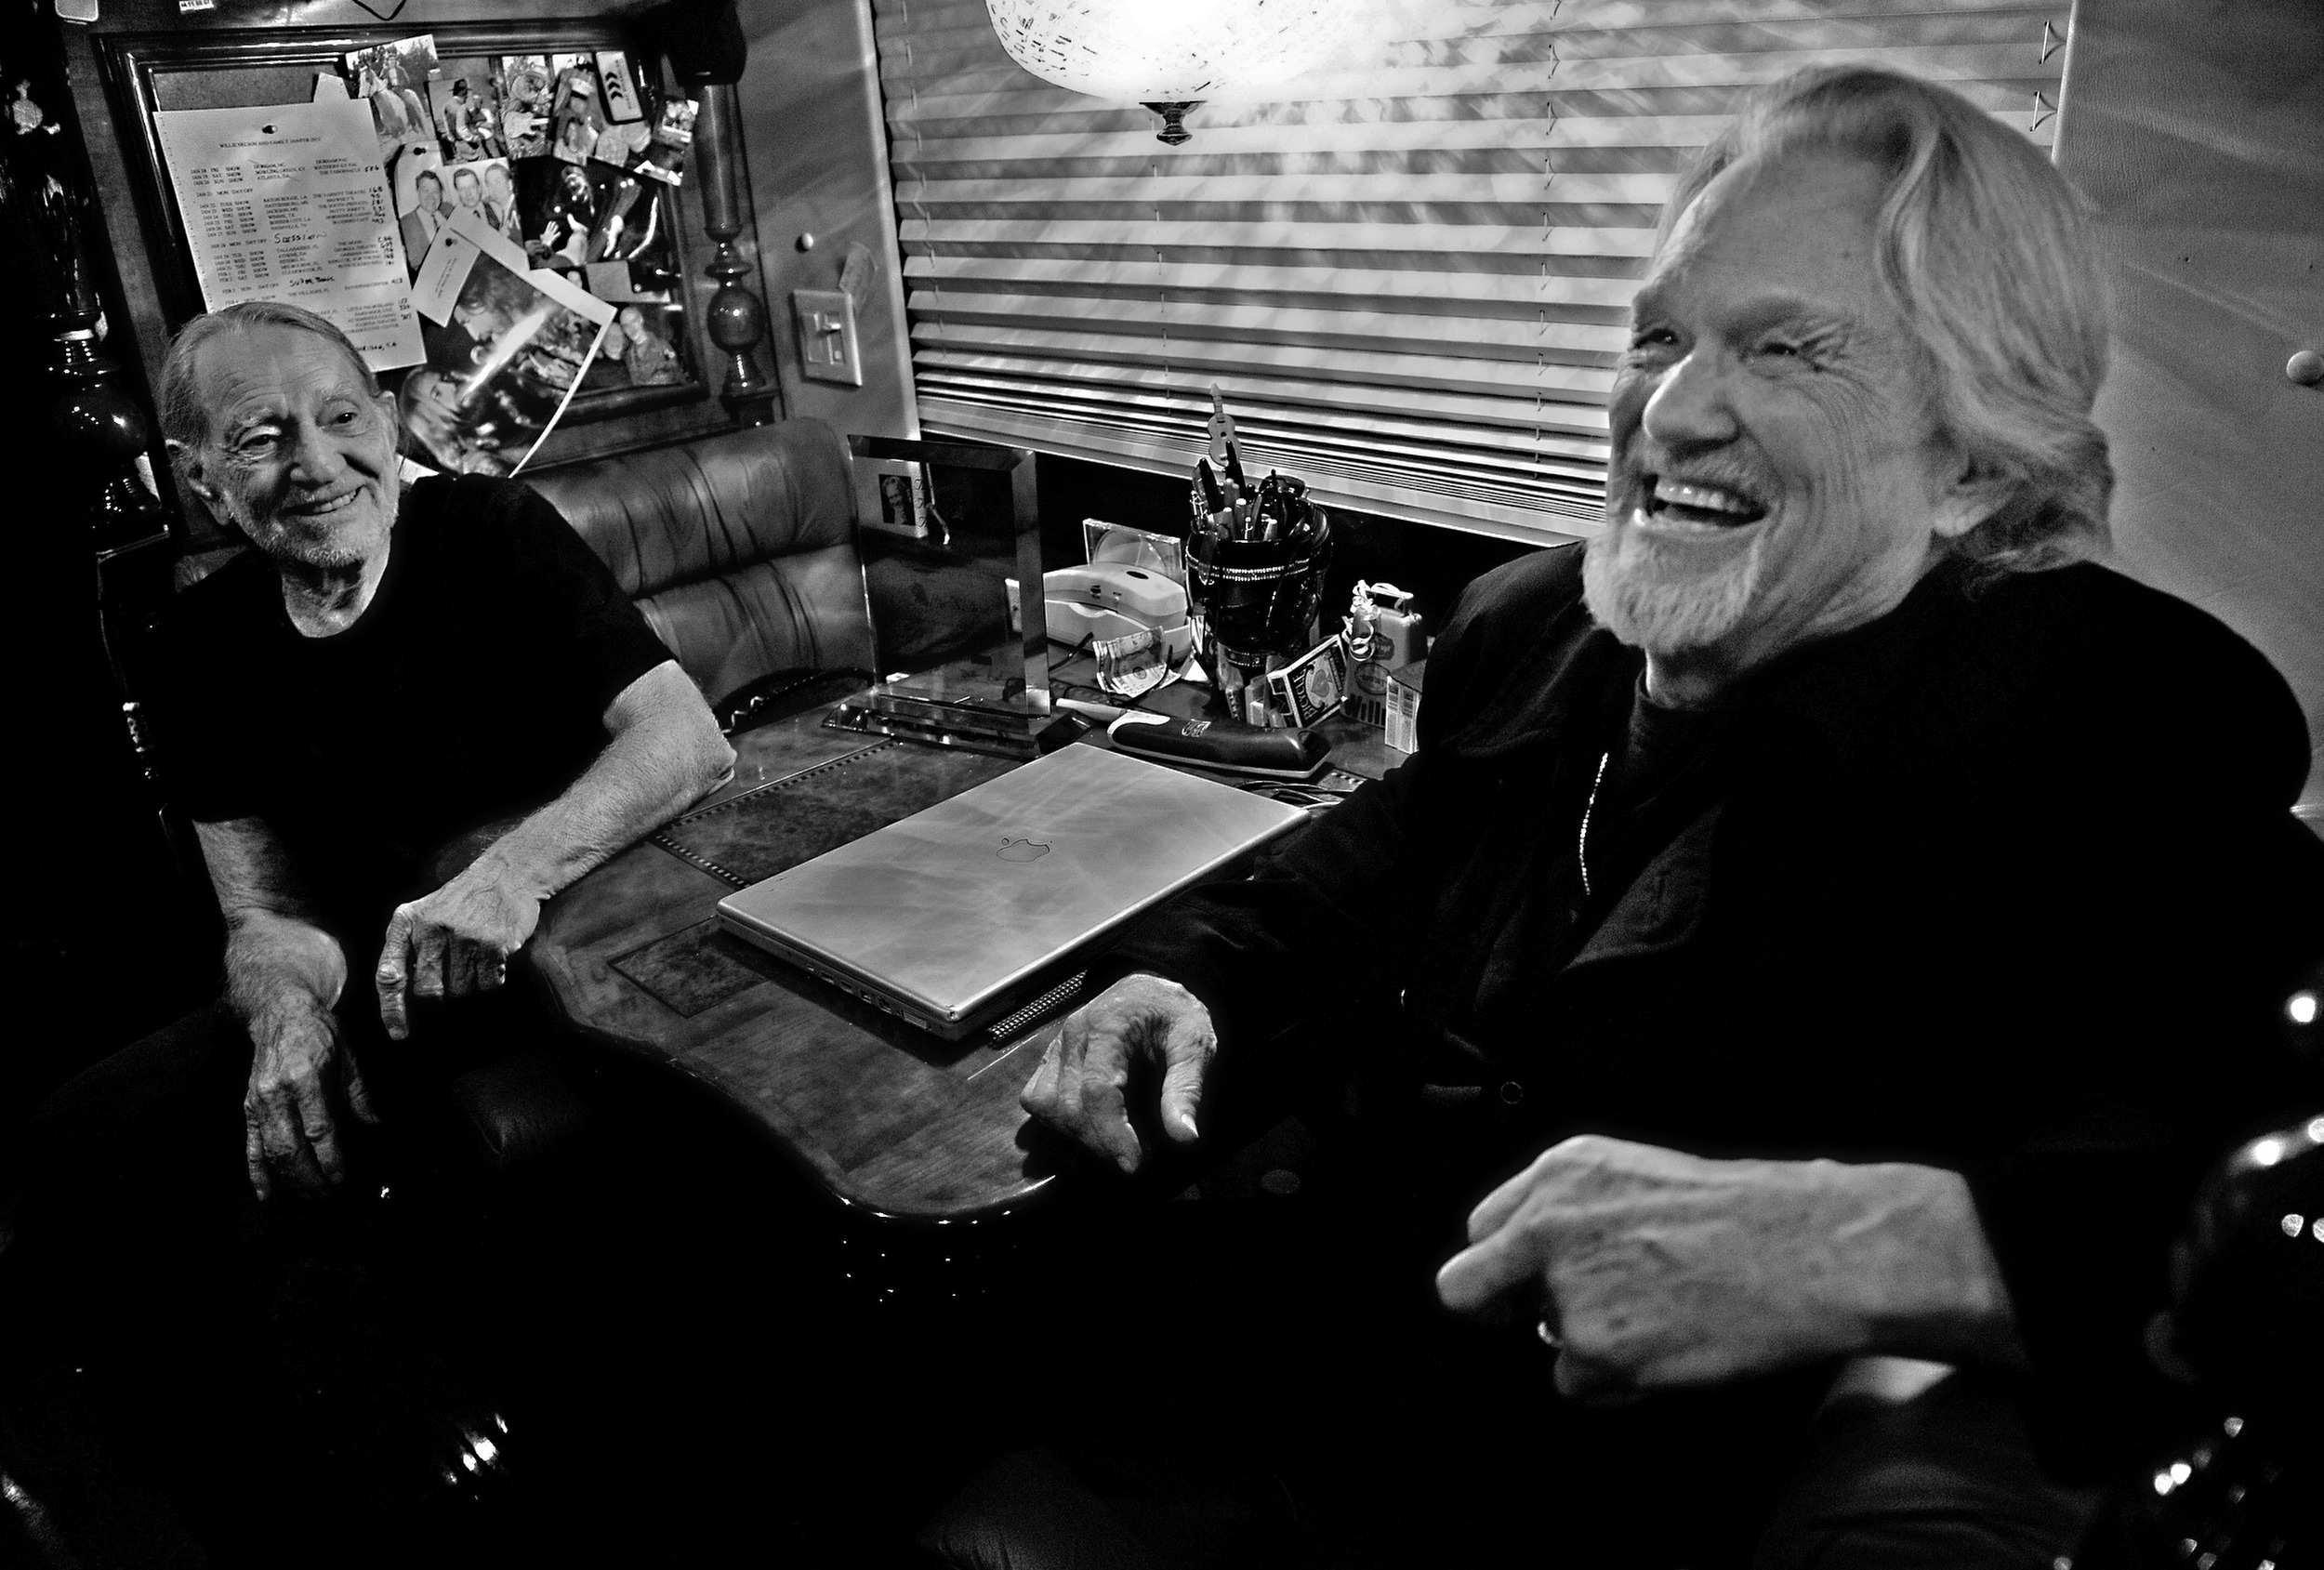  Willie Nelson and Kris Kristofferson share a joke together on the tour bus after performing at the Bluebird Cafe in Nashville, Tenn. 